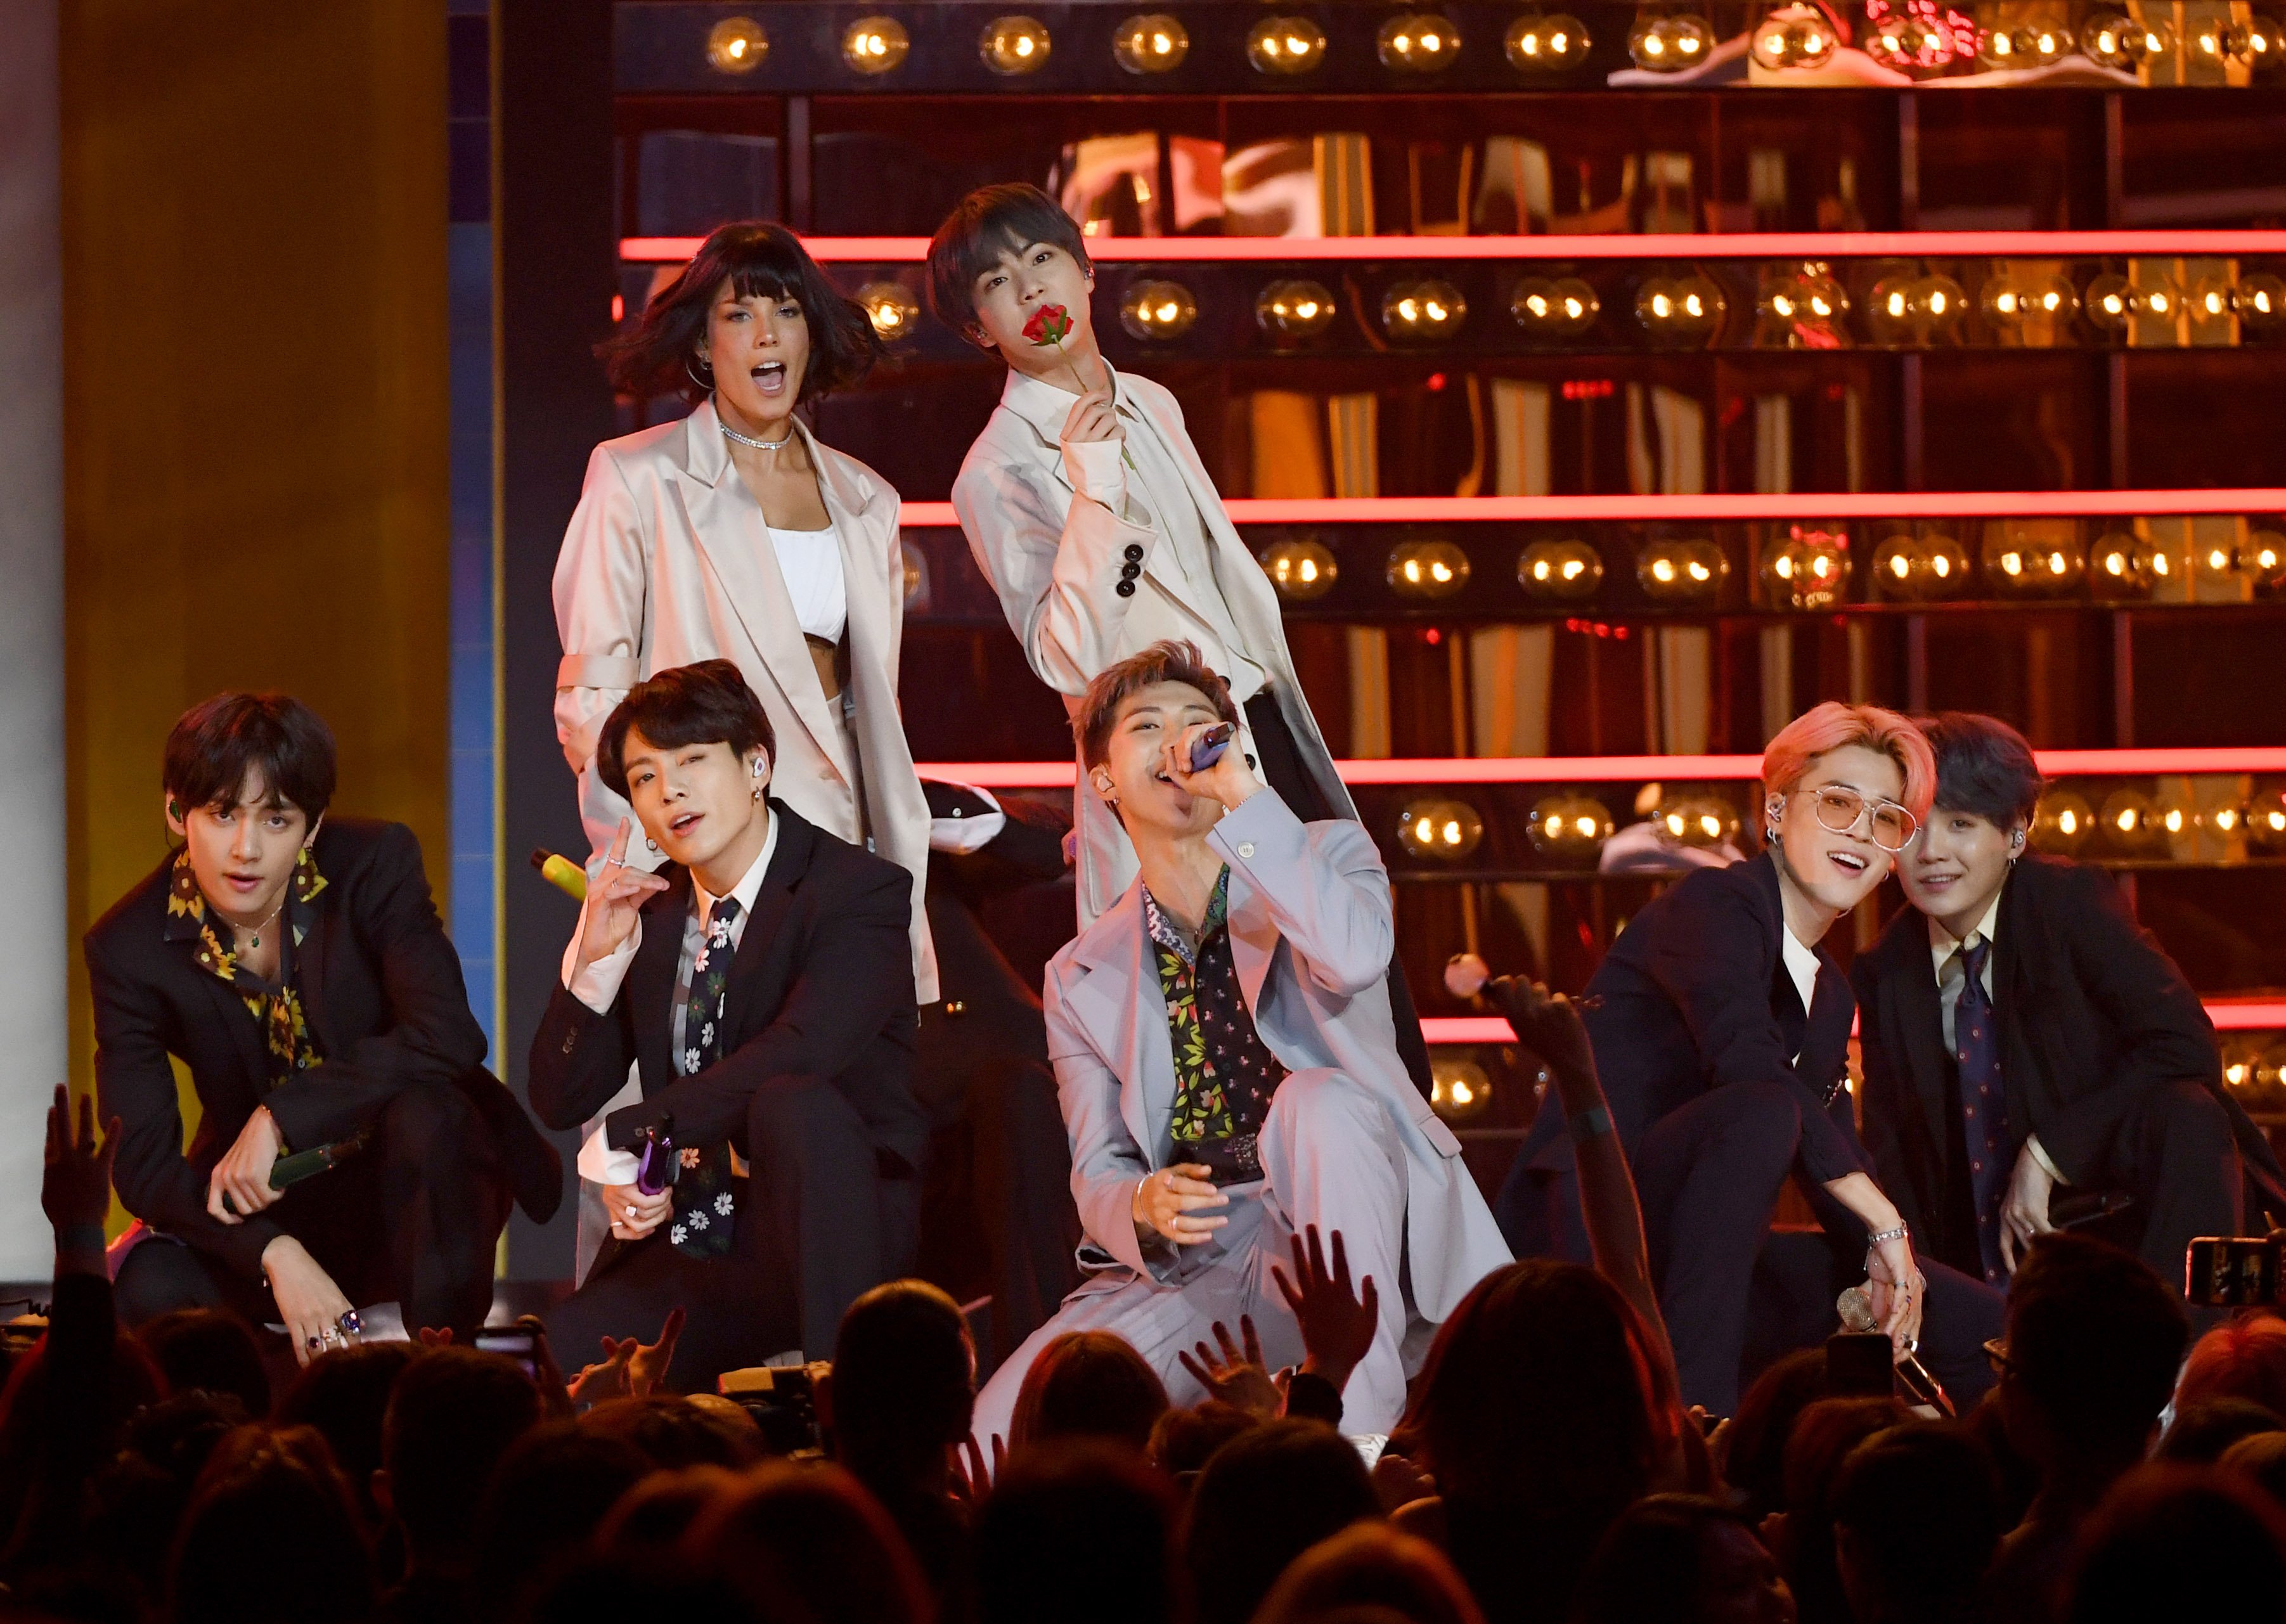 Halsey and BTS perform during the 2019 Billboard Music Awards at MGM Grand Garden Arena